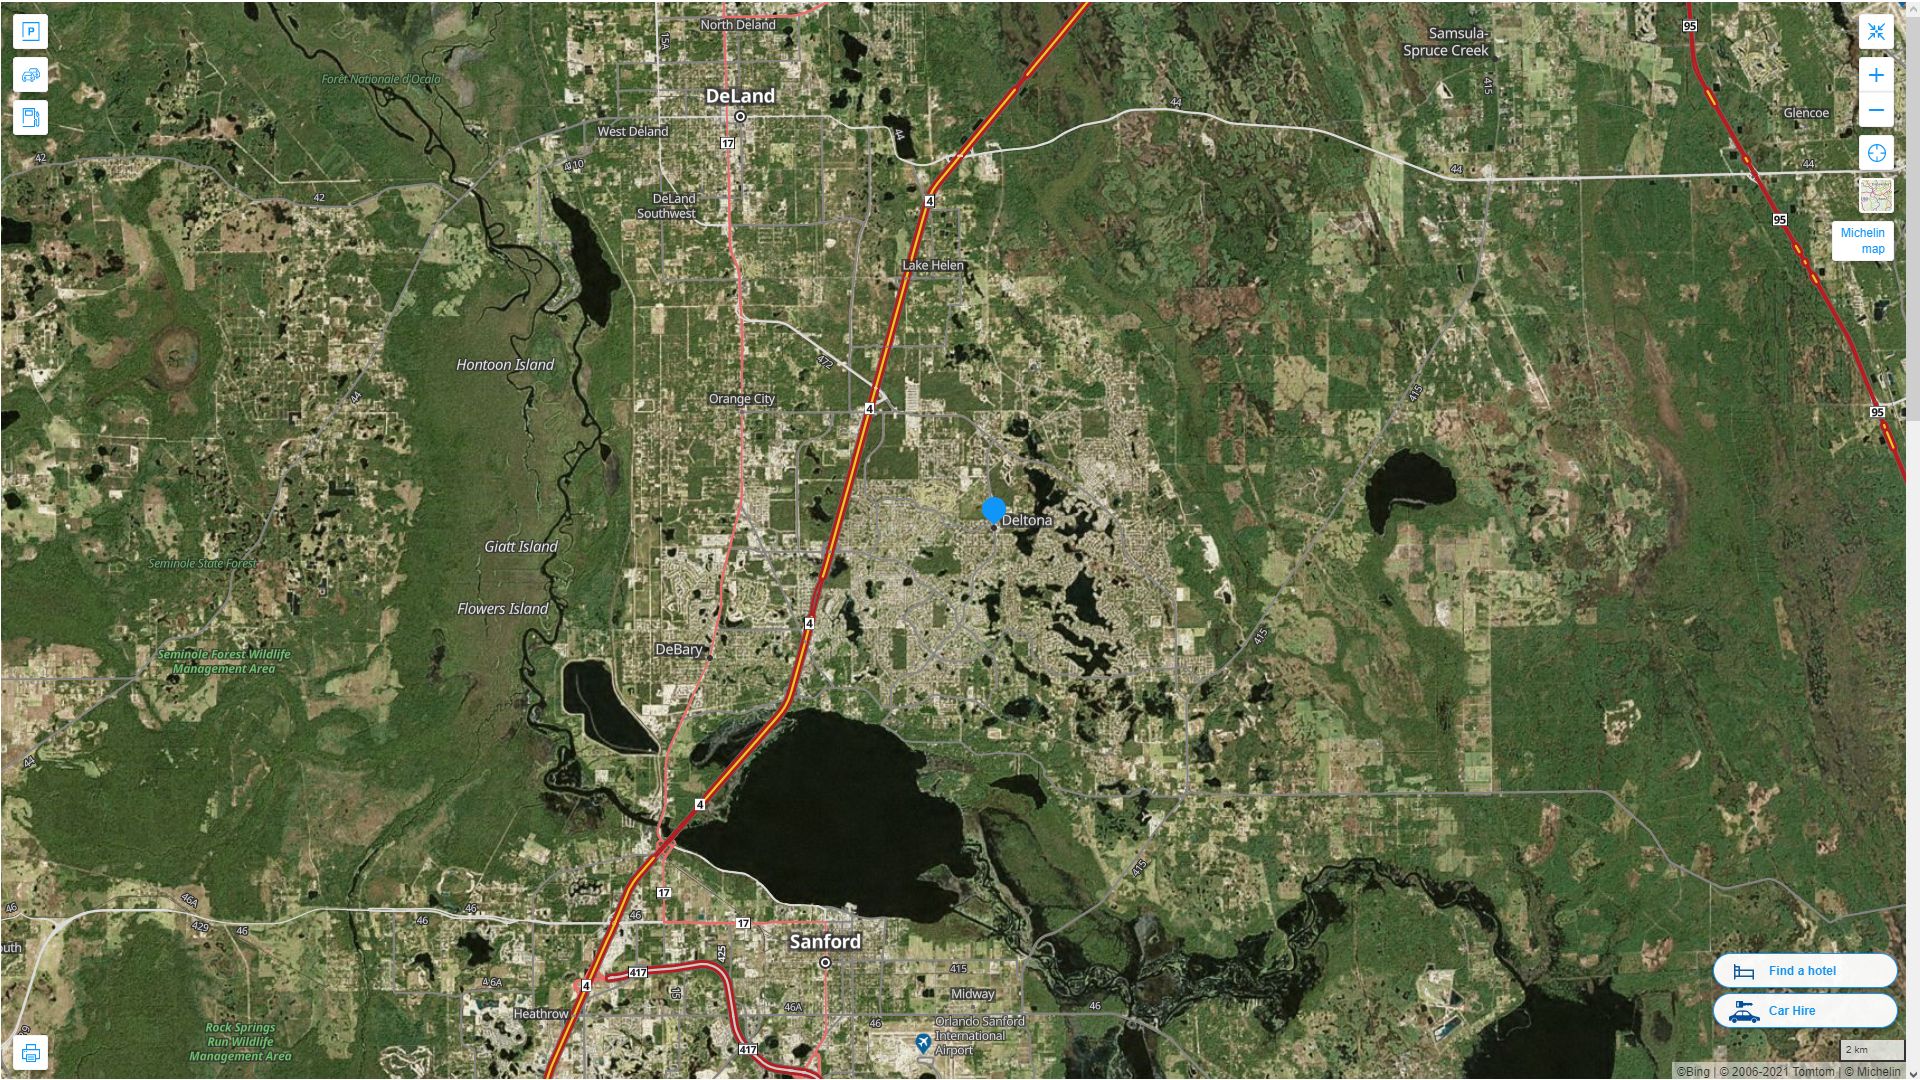 Deltona Florida Highway and Road Map with Satellite View